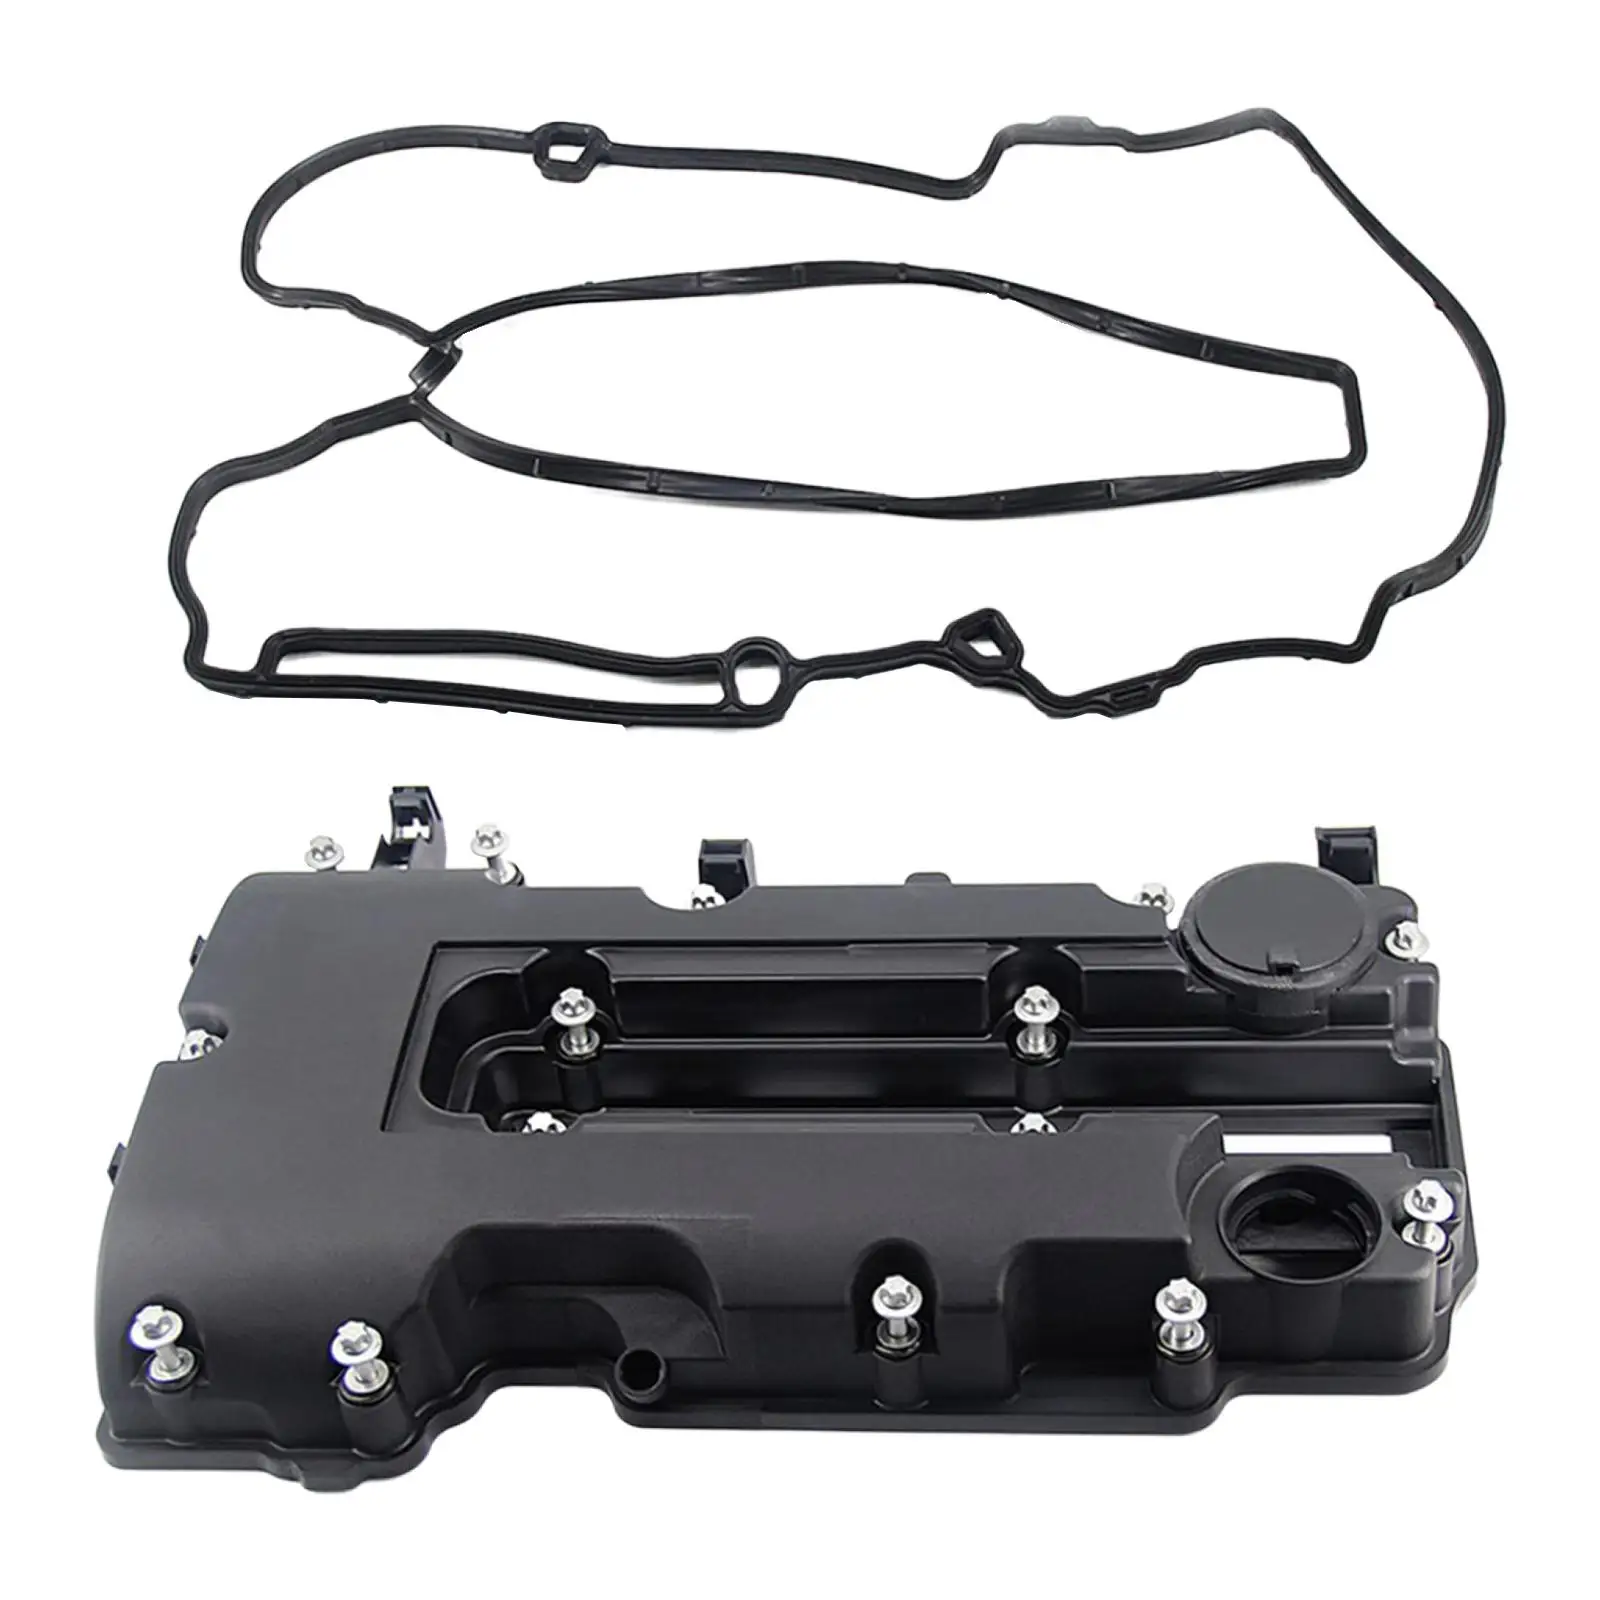 Camshaft Engine Cover W/ 73746 25198874 2519849 for Replace Accessory